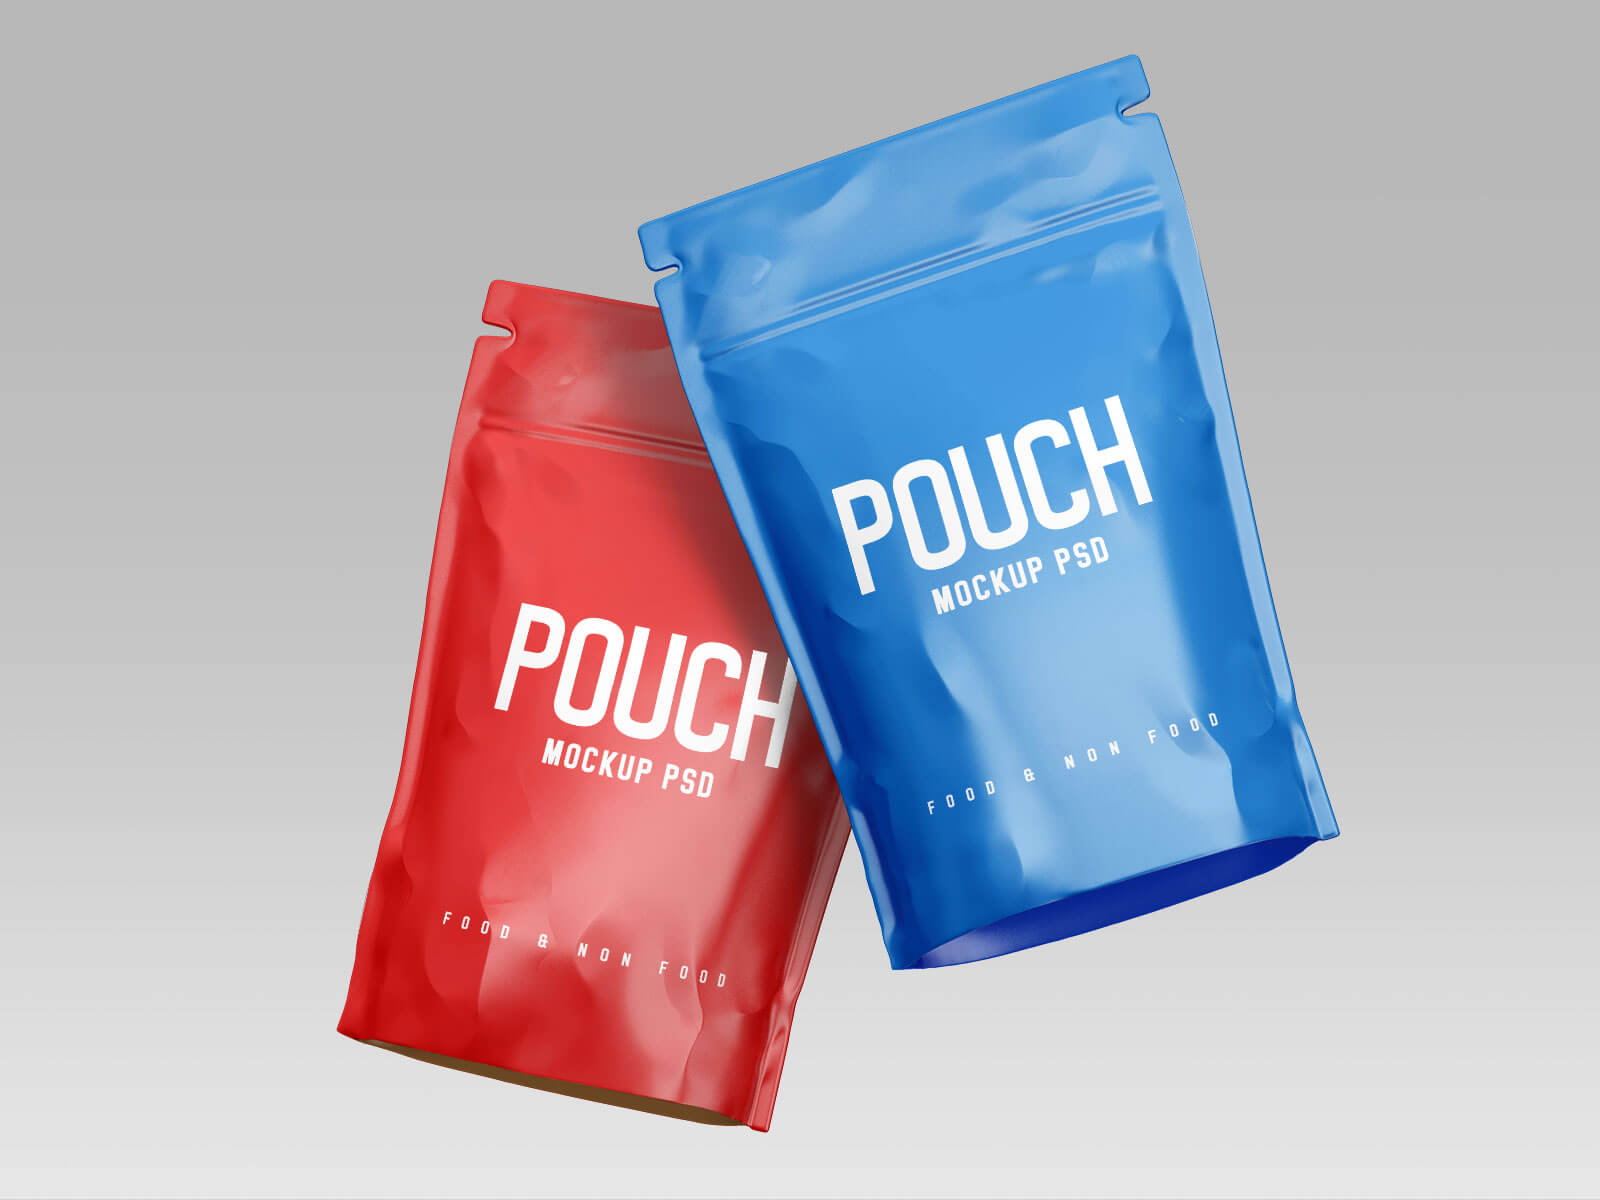 Free Stand-up Pouch (Doypack) Food Packaging Mockup PSD Set (3)